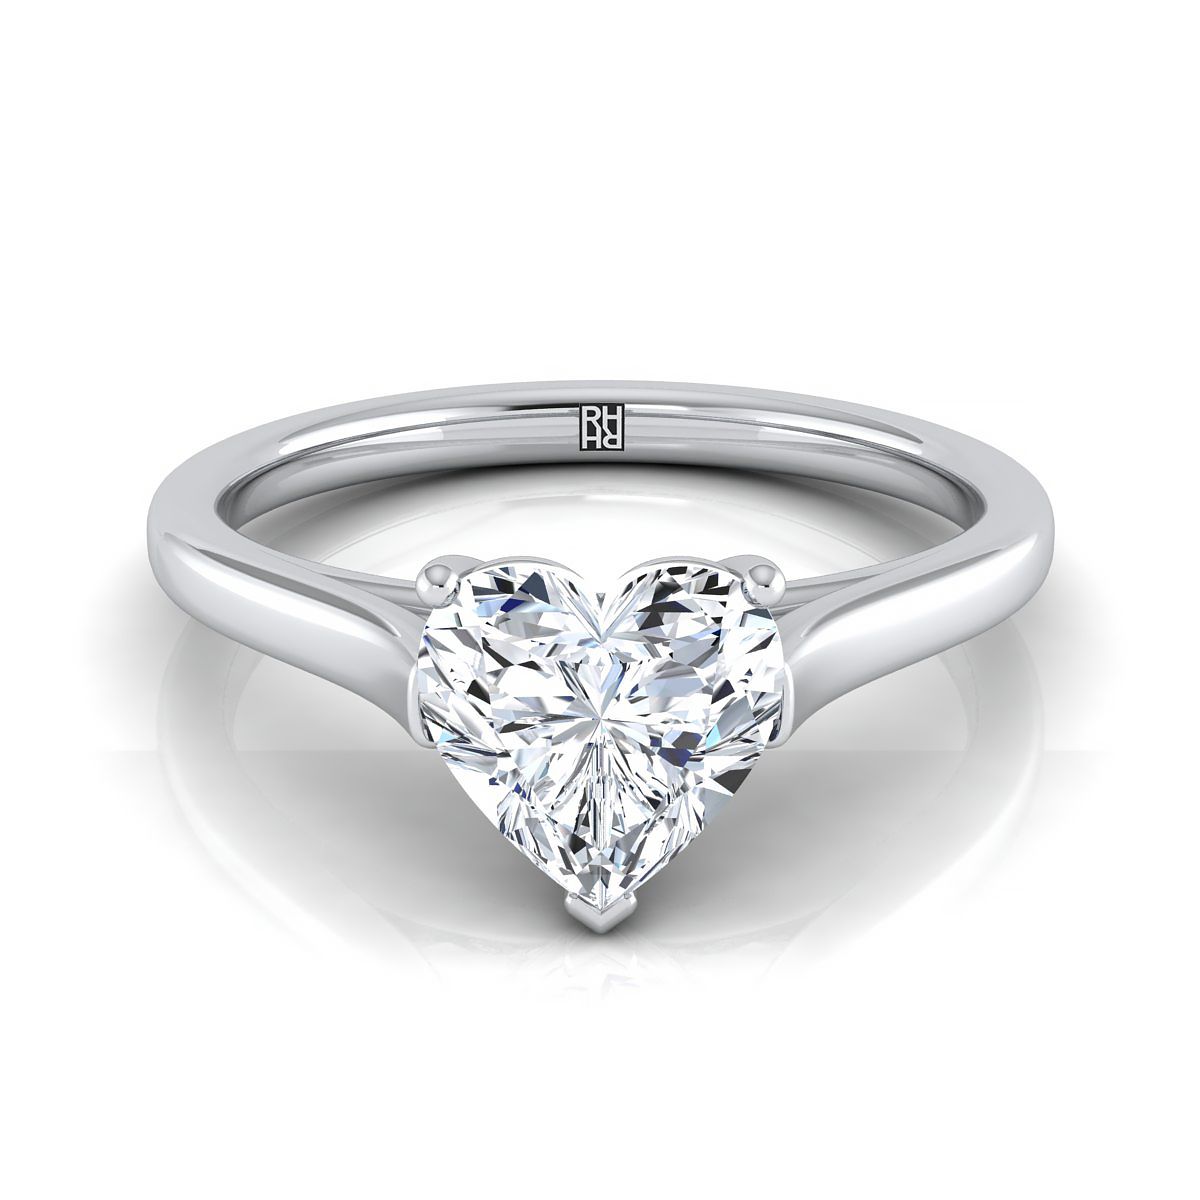 14K White Gold Heart Shape Center  Elegant Cathedral Solitaire Engagement Ring